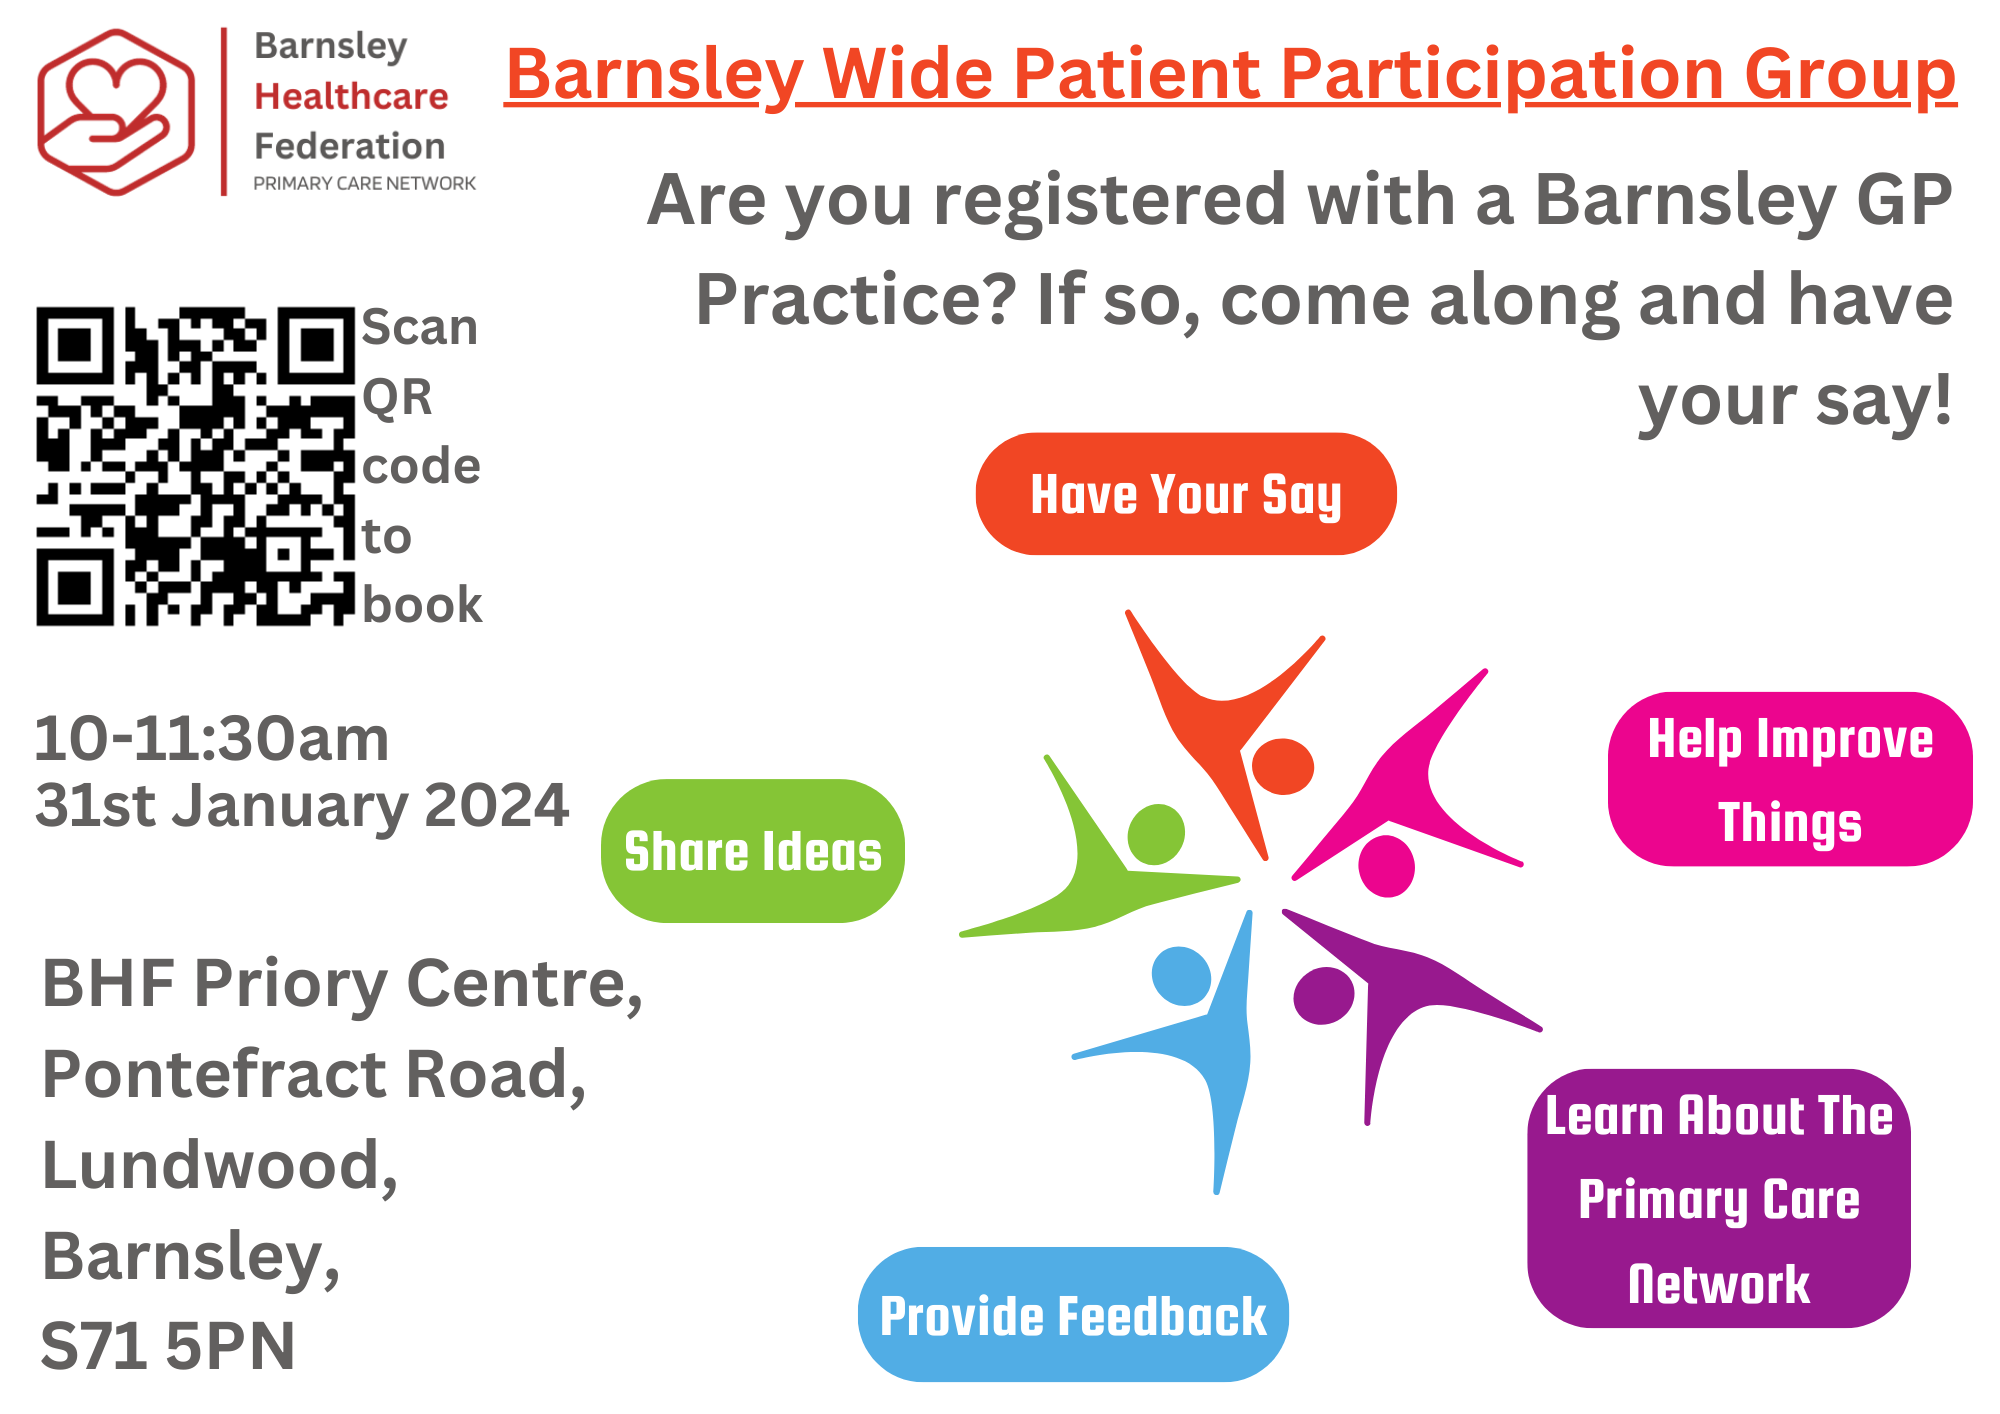 Barnsley Wide Patient Participation Group